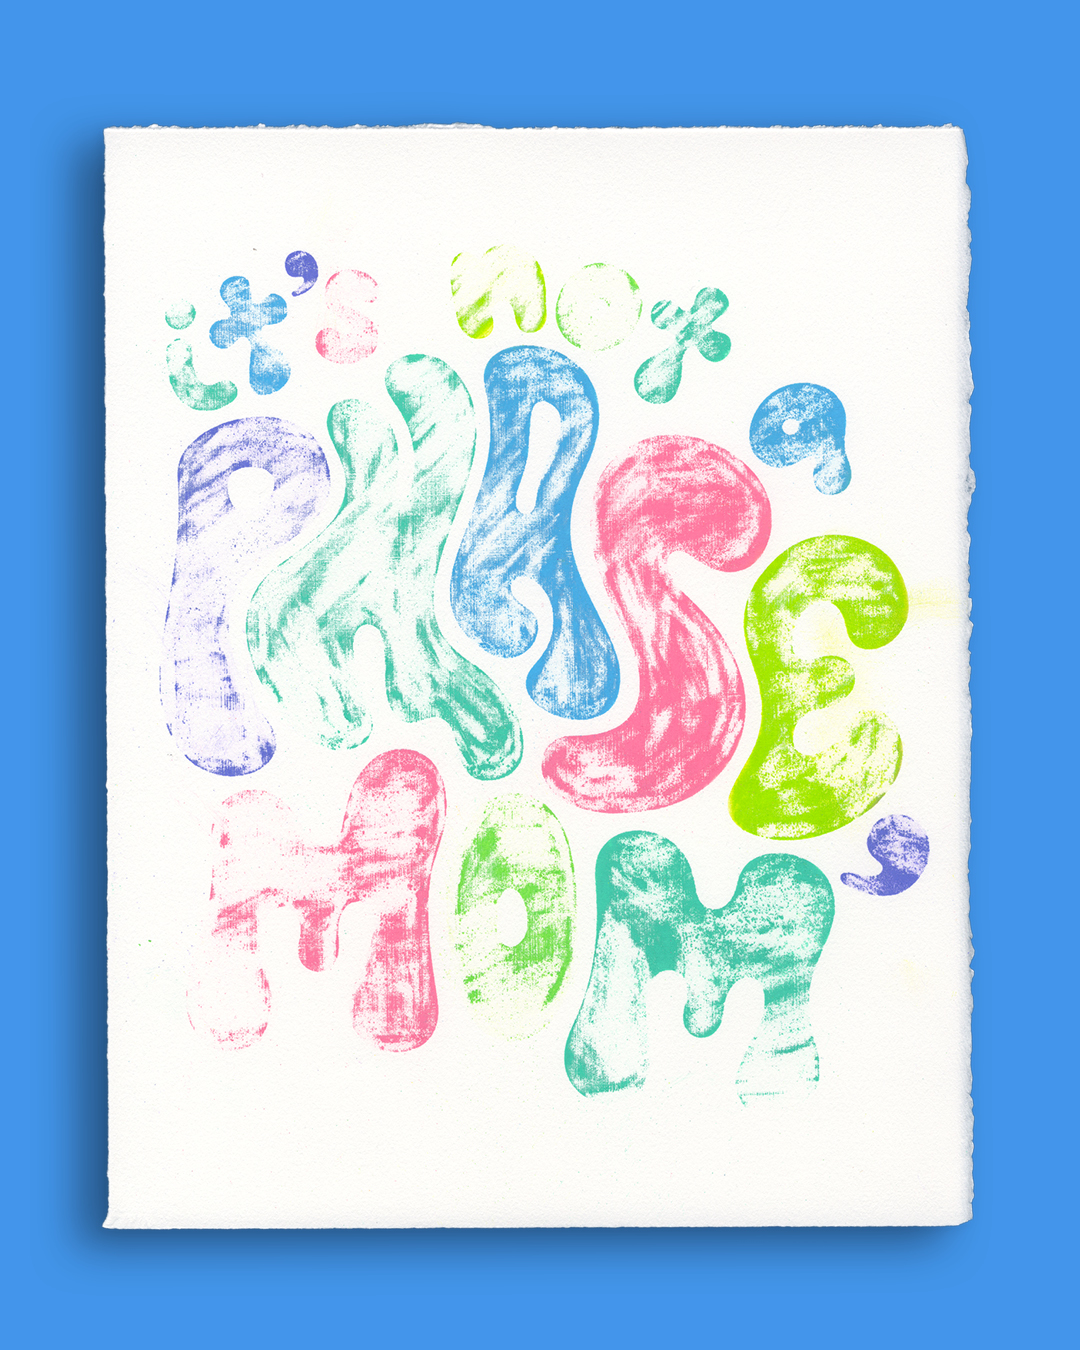 Another print with letters in alternating colors of teal, light blue, purpl, pink, charteuse, and lime green. The type is chalky once again with a lot of white space.